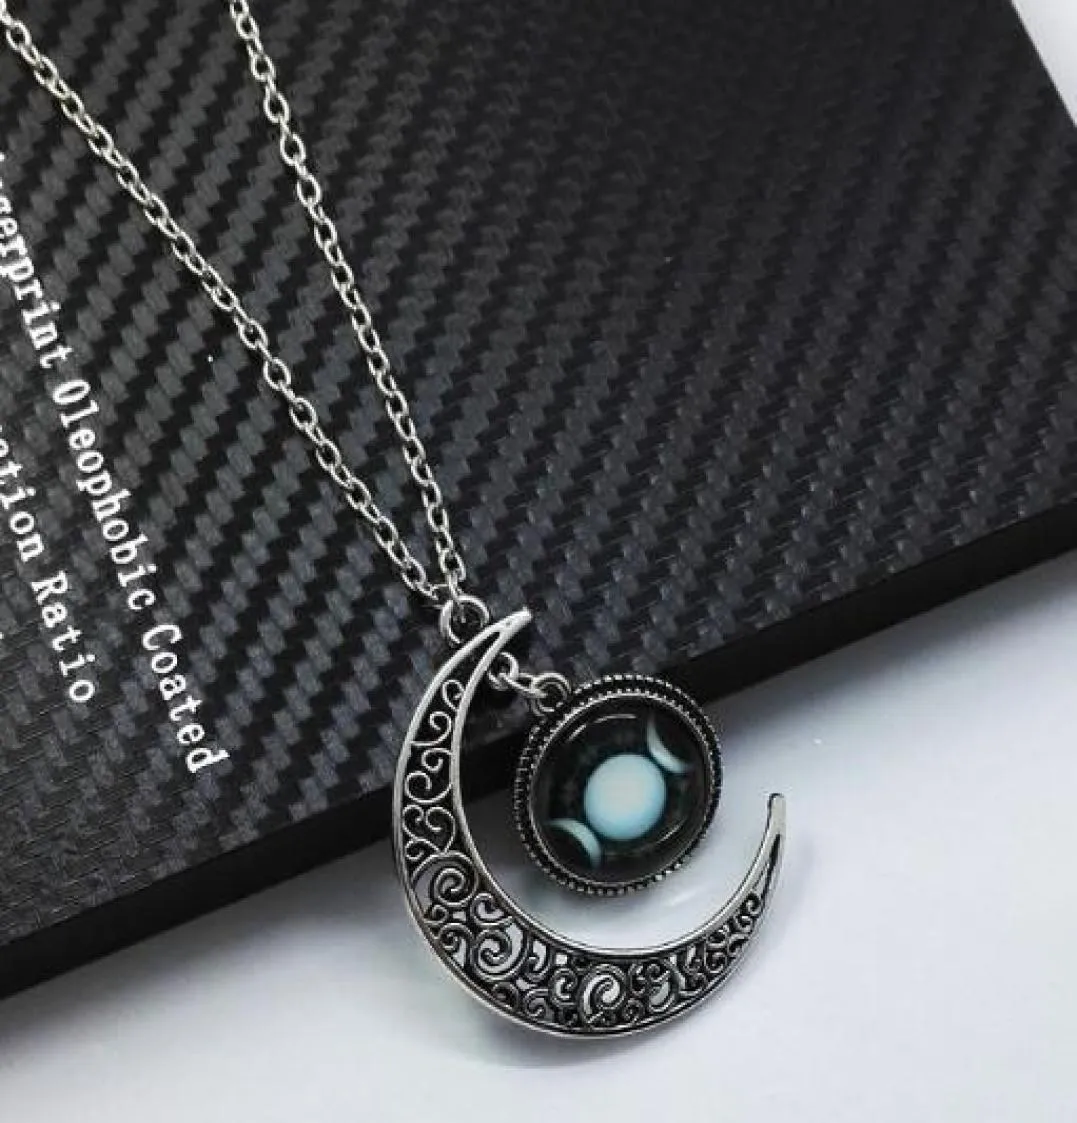 style Triple moon goddess black wiccan necklace with star moon gems is fashionable and exquisite5029738